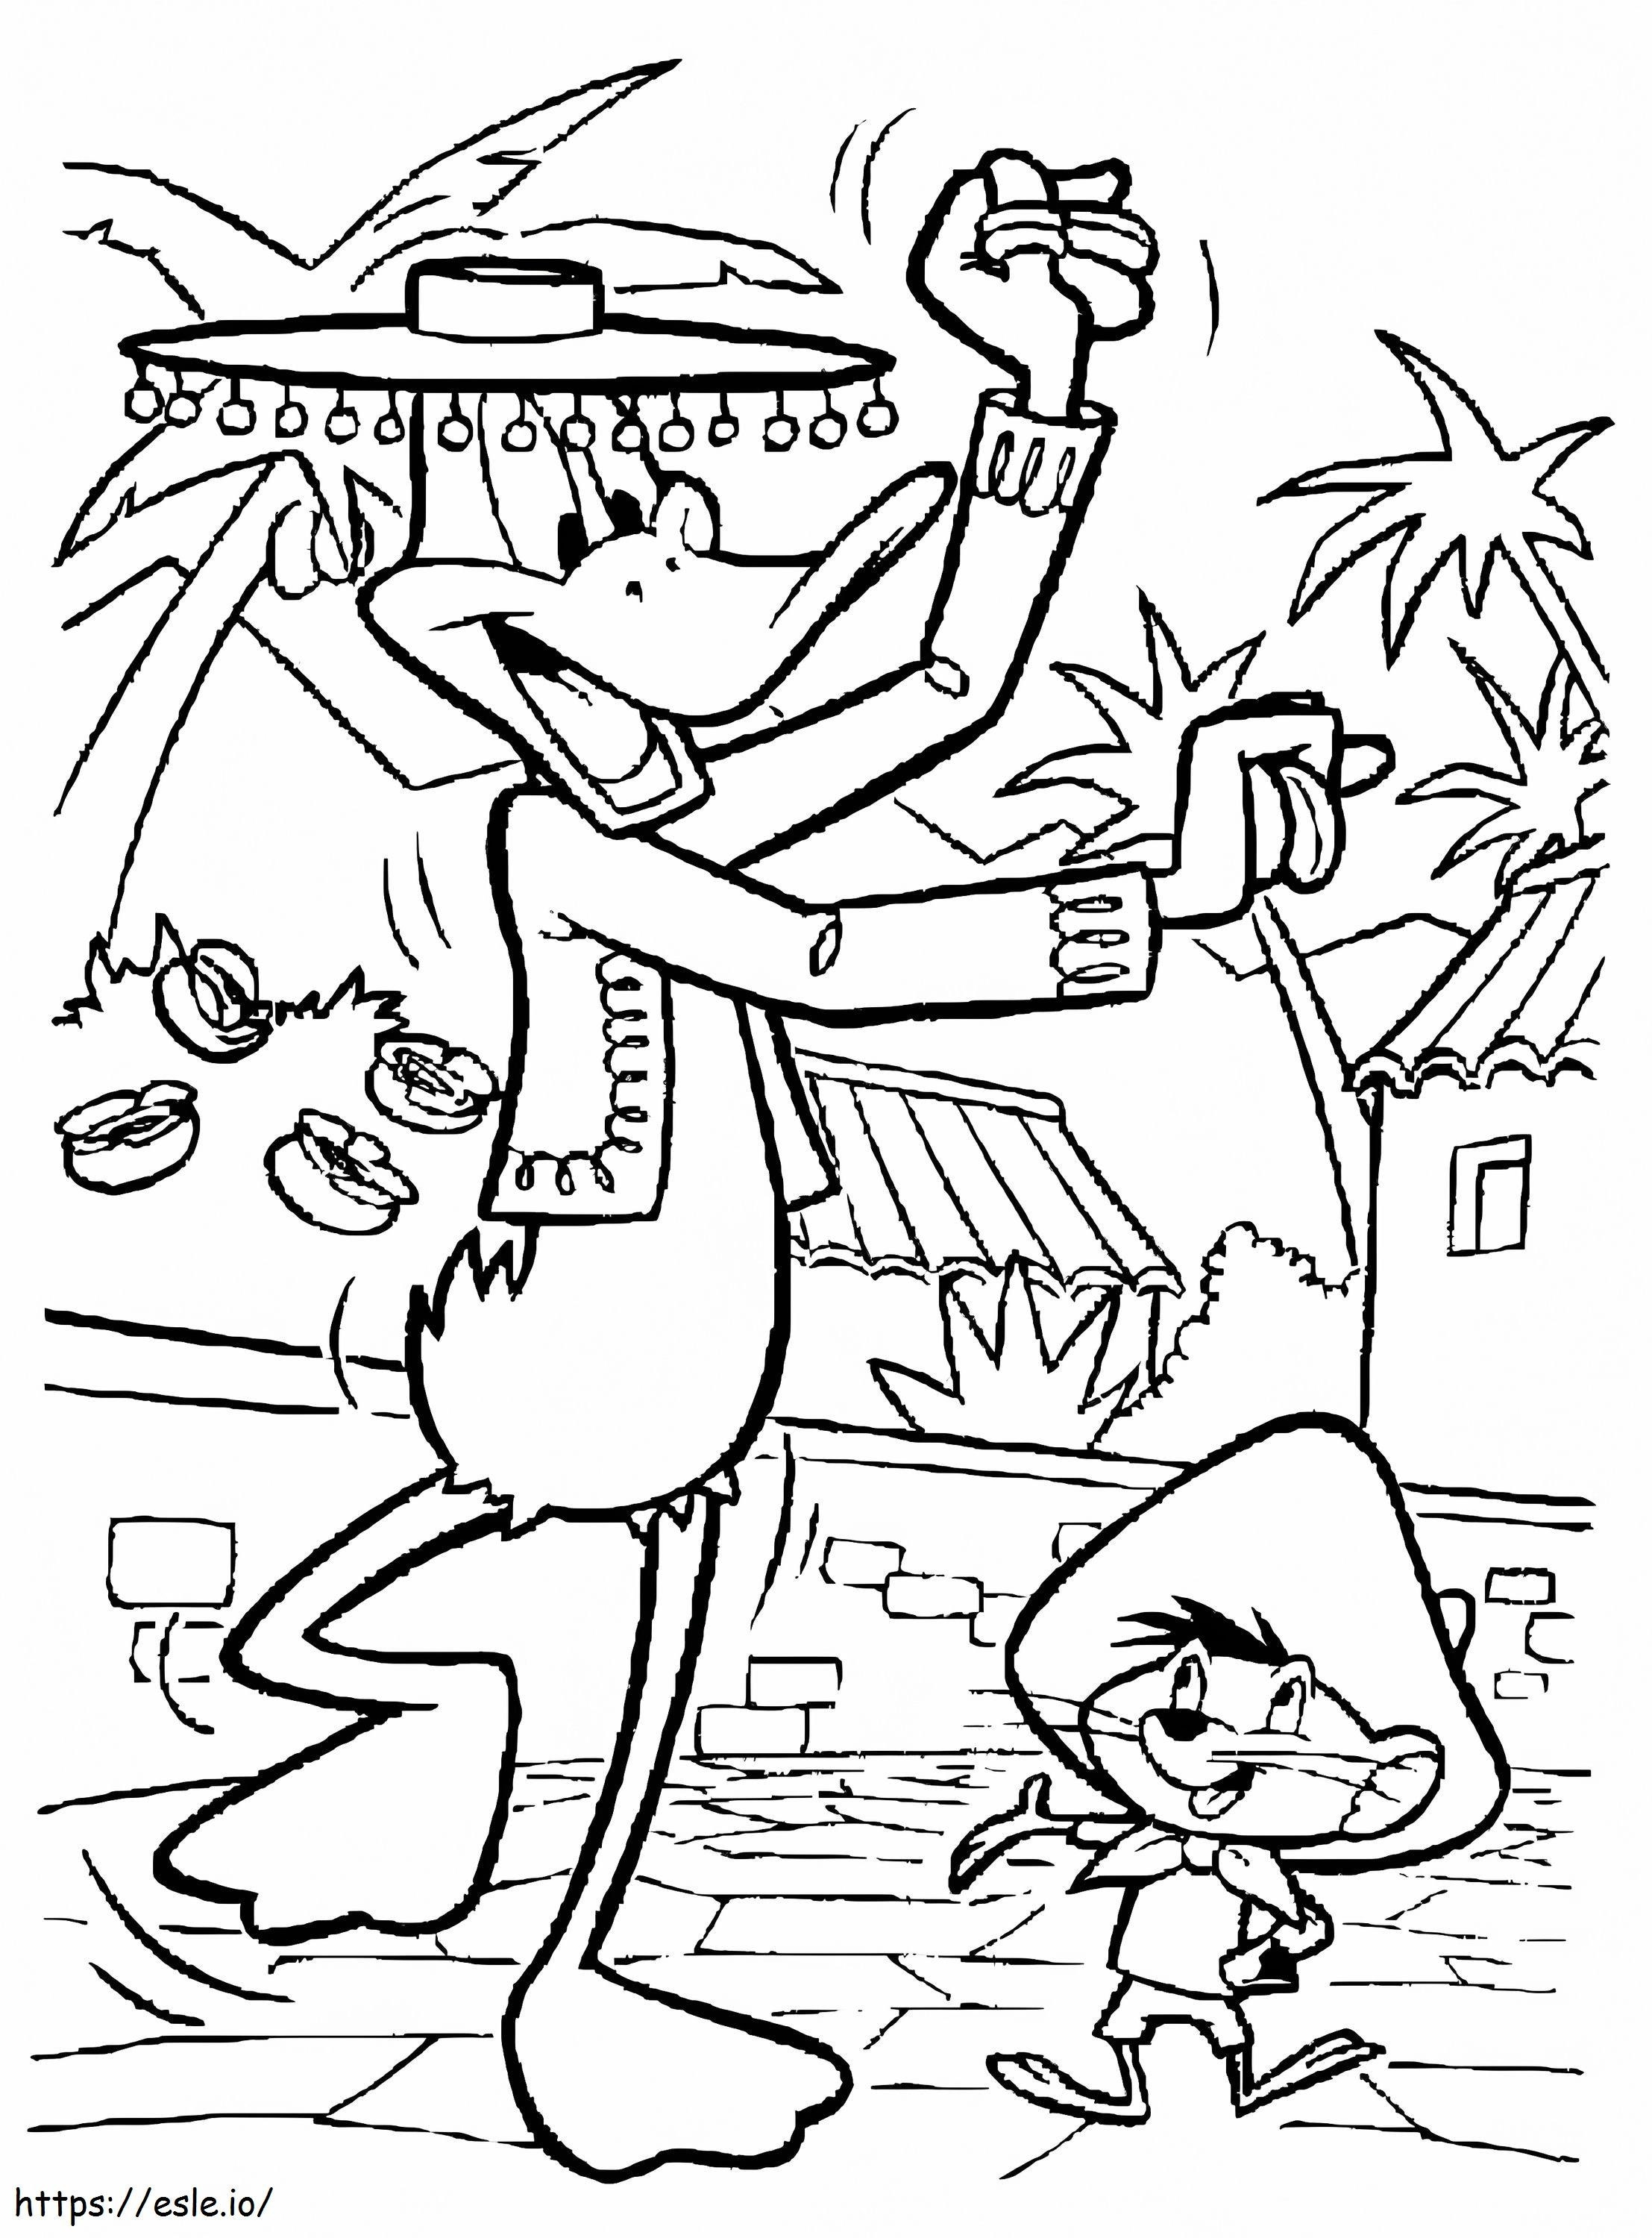 Speedy Gonzales And Daffy Duck coloring page